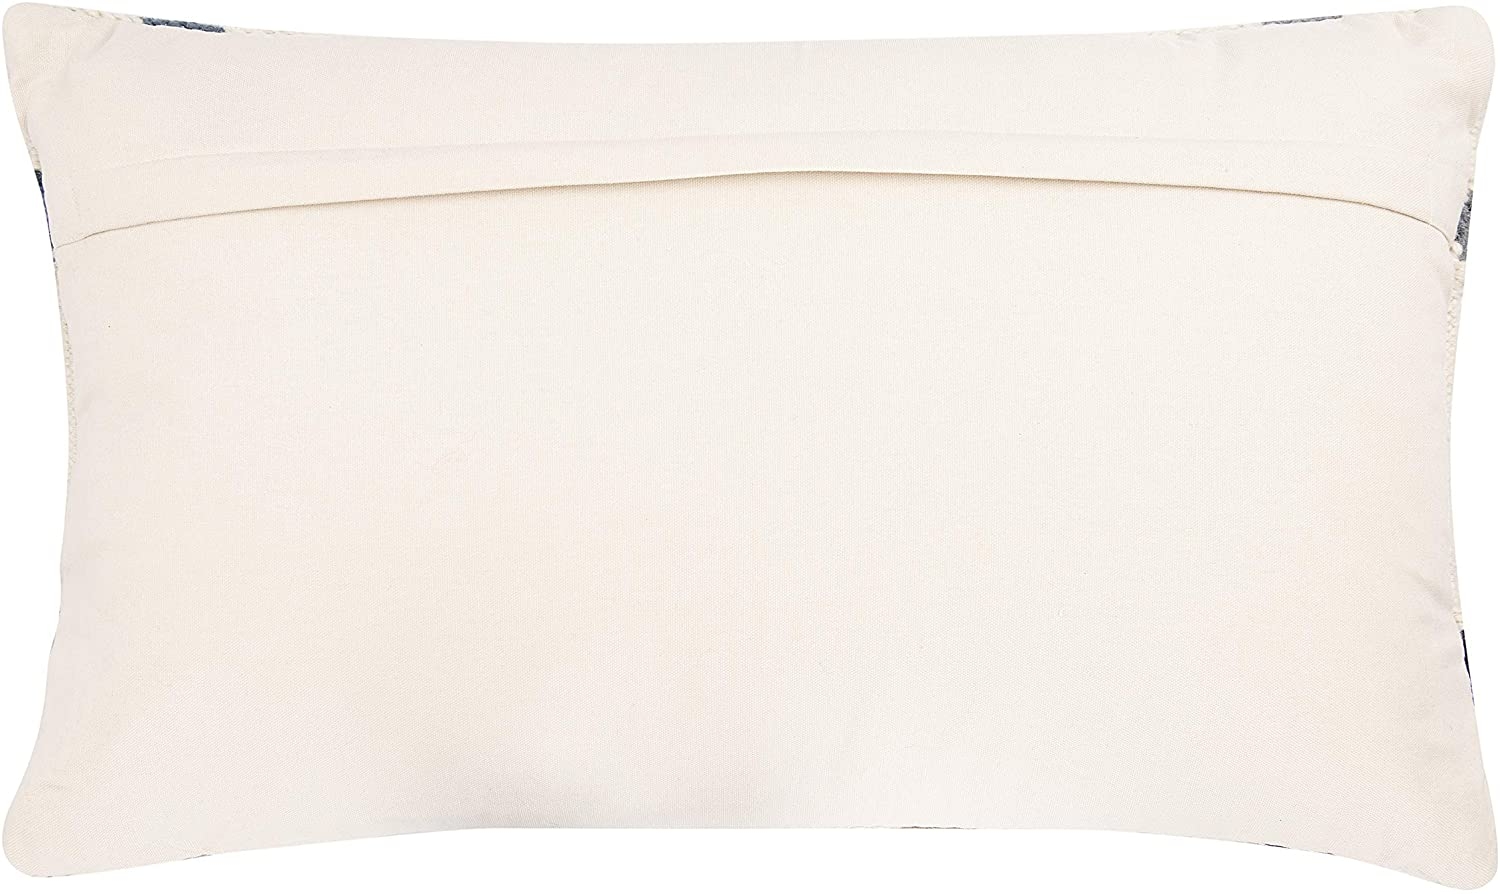 Wool Blend Lumbar Pillow with Pattern, Off-White, Blue & Brown, 26" x 16" - Image 5